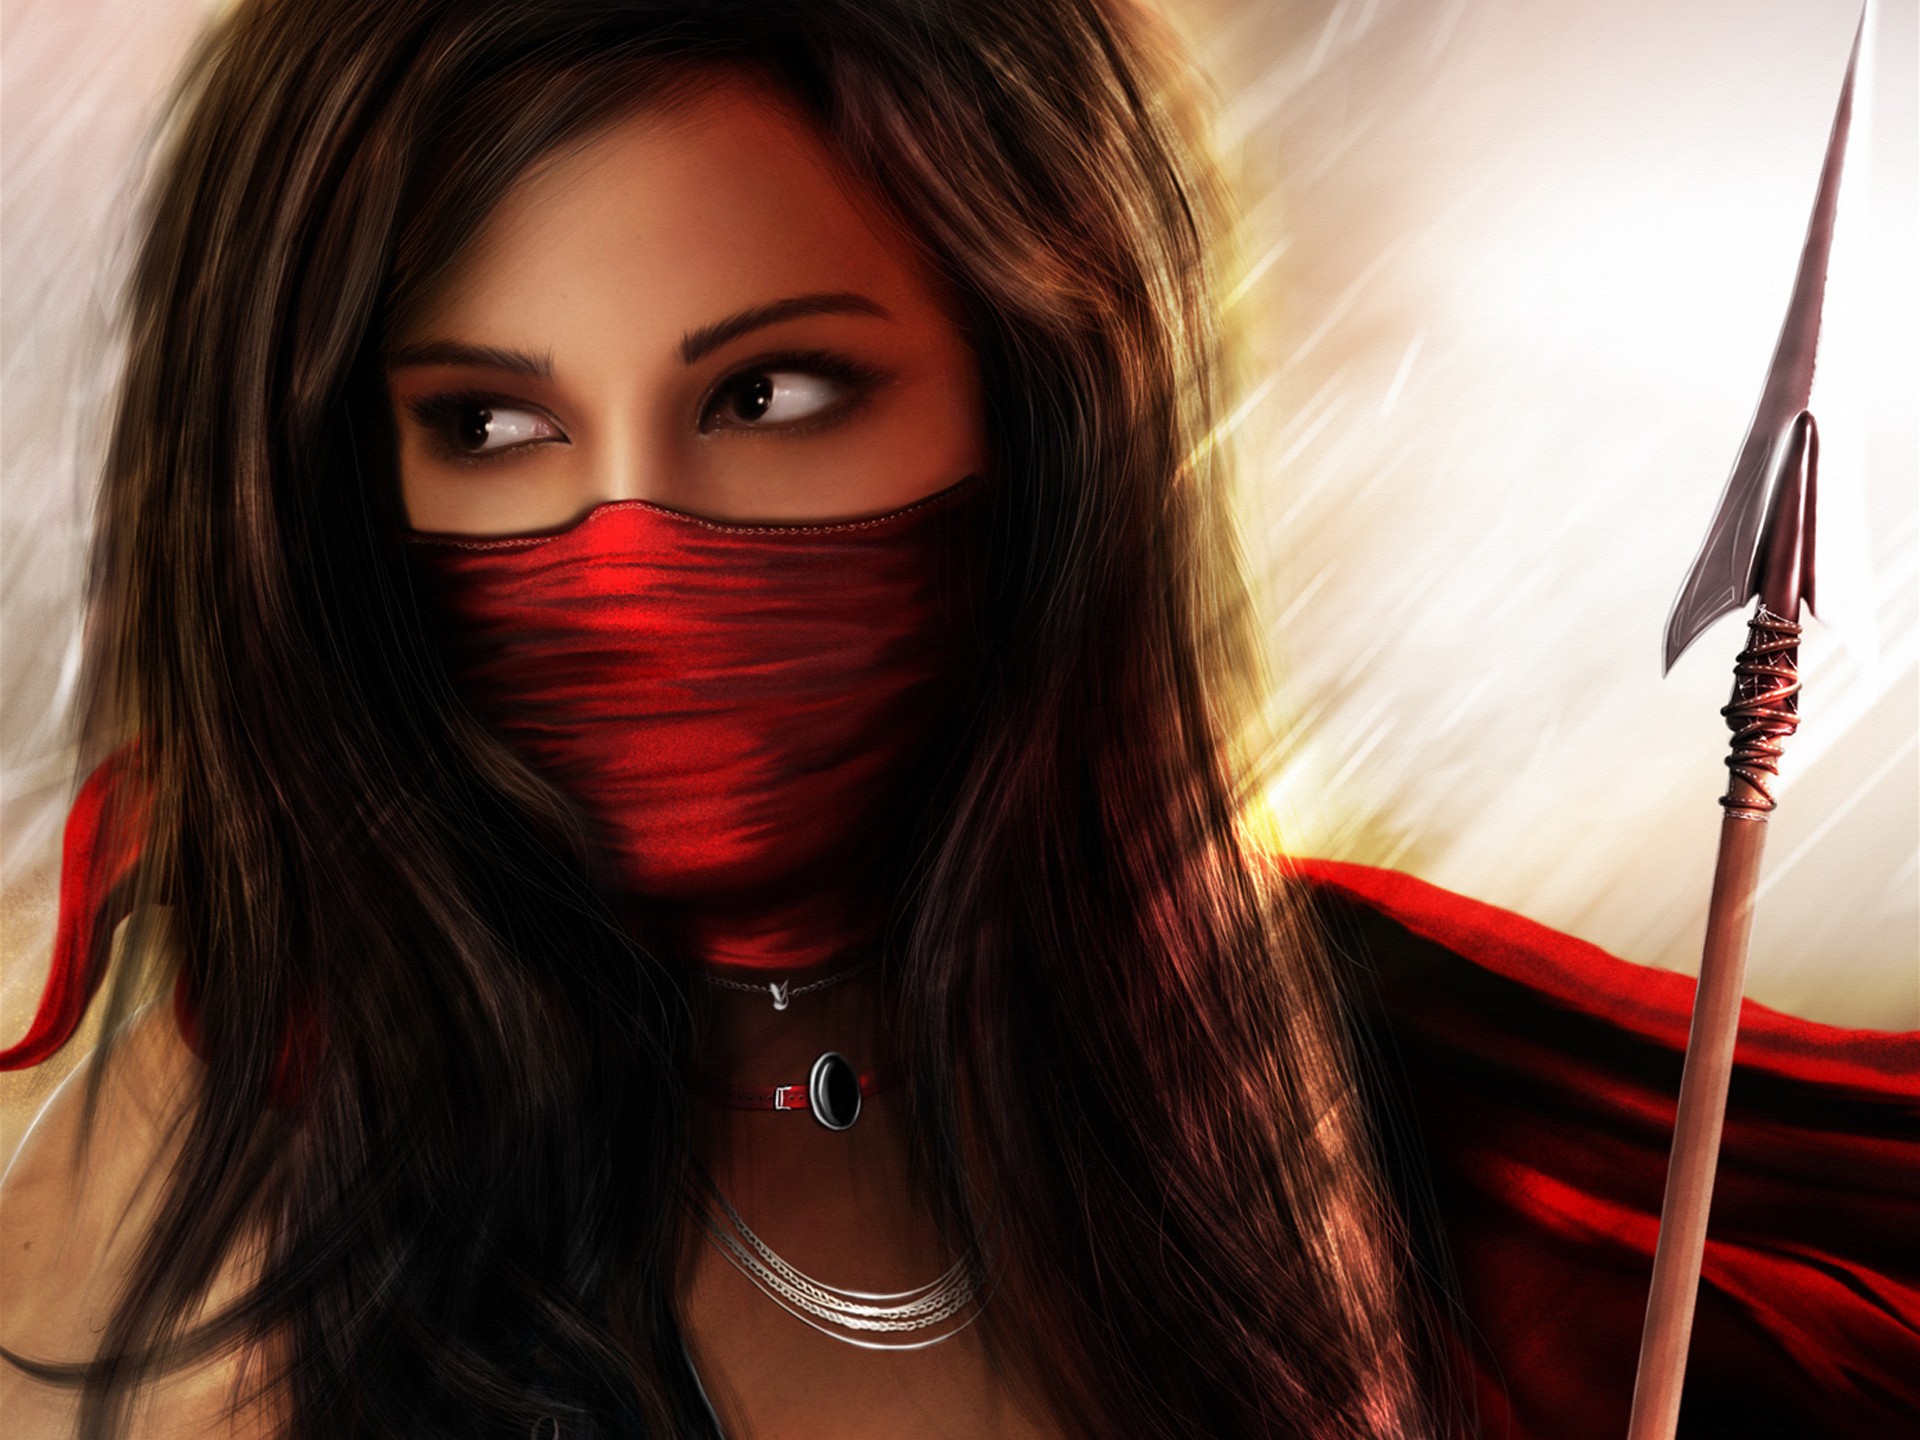 manipulations, Cg, Digital, Art, Art, Fantasy, Warriors, Spear, Weapons, Brunettes, Face, Mask, Eyes, Jewelry, Light, Backlit, Scarf, Maiden, Red, Colors, Women, Females, Girls, Babes, Style, Look, Stare Wallpaper